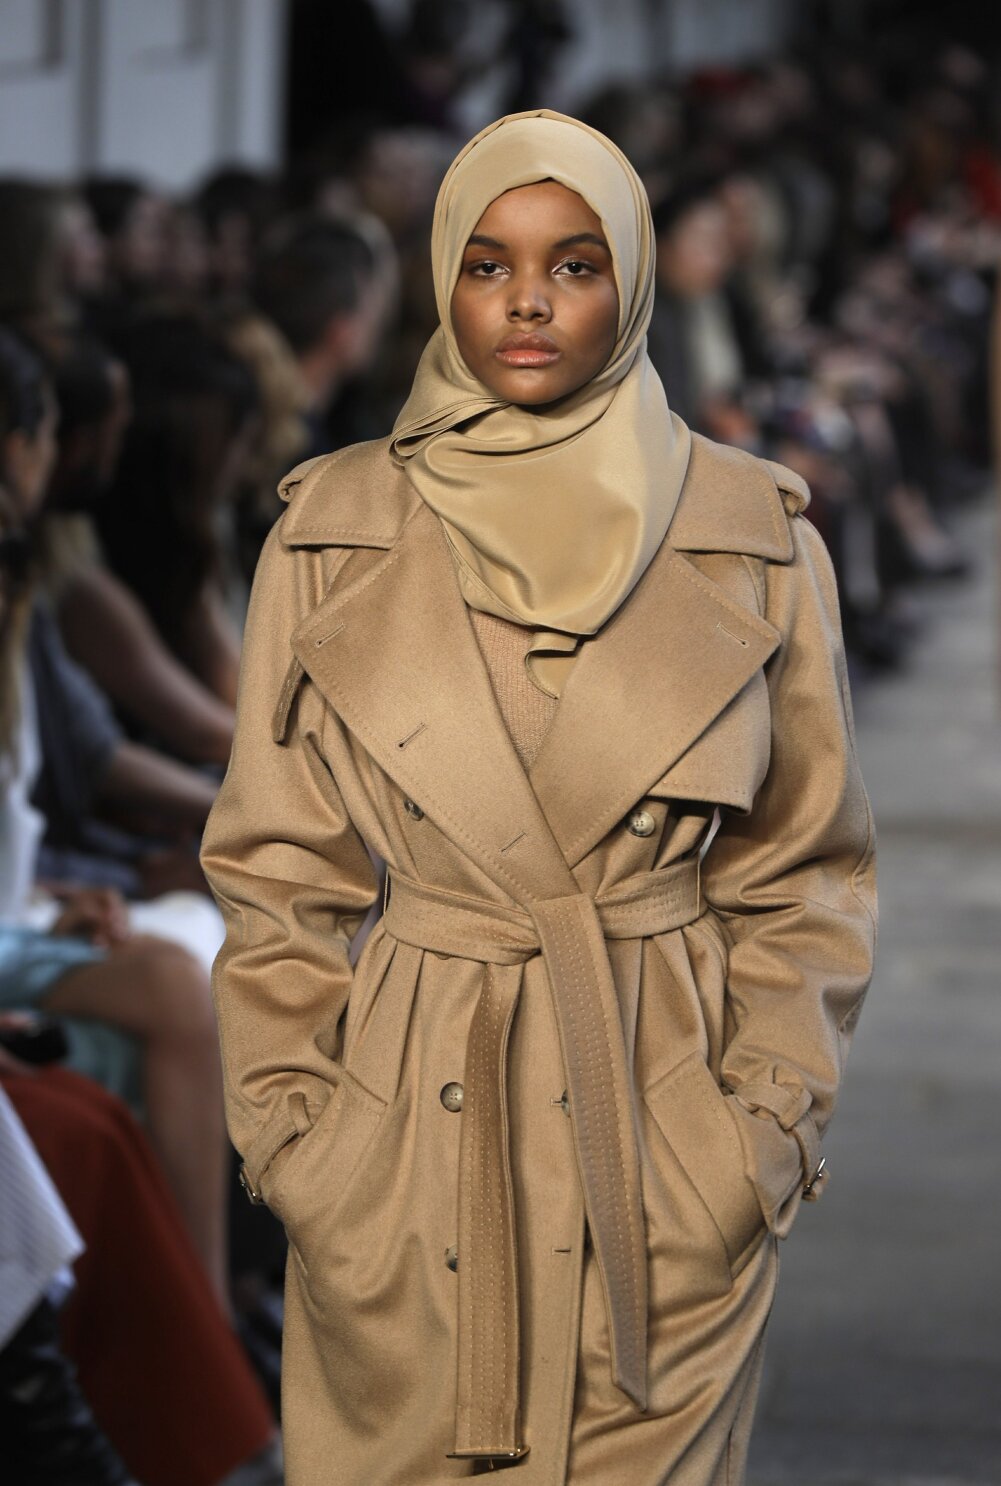 Are Headscarves Only Cool When They're on the Runway?